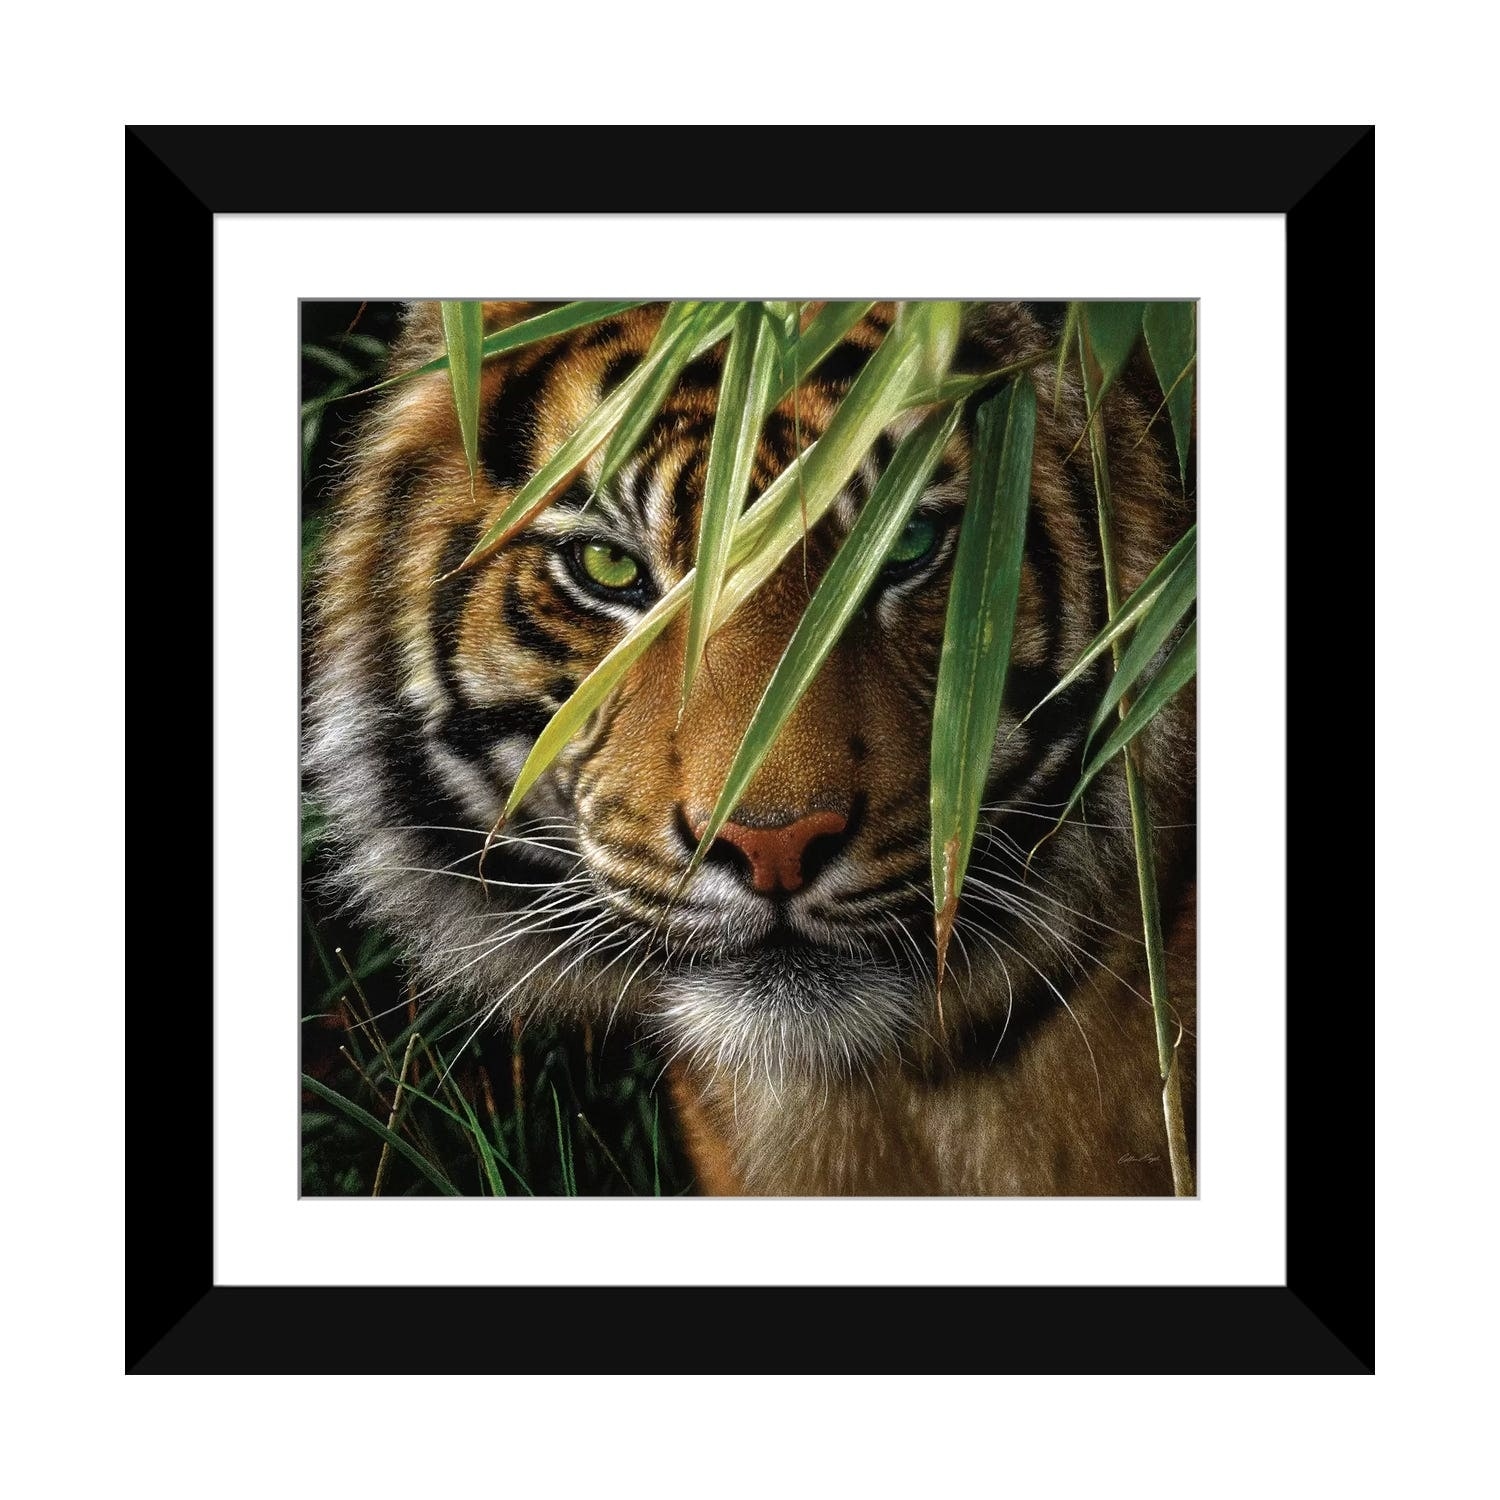 https://ak1.ostkcdn.com/images/products/is/images/direct/77f6135ac0860d7430c74b2dbbd478146f78a95b/iCanvas-%22Tiger---Emerald-Forest%22-by-Collin-Bogle.jpg